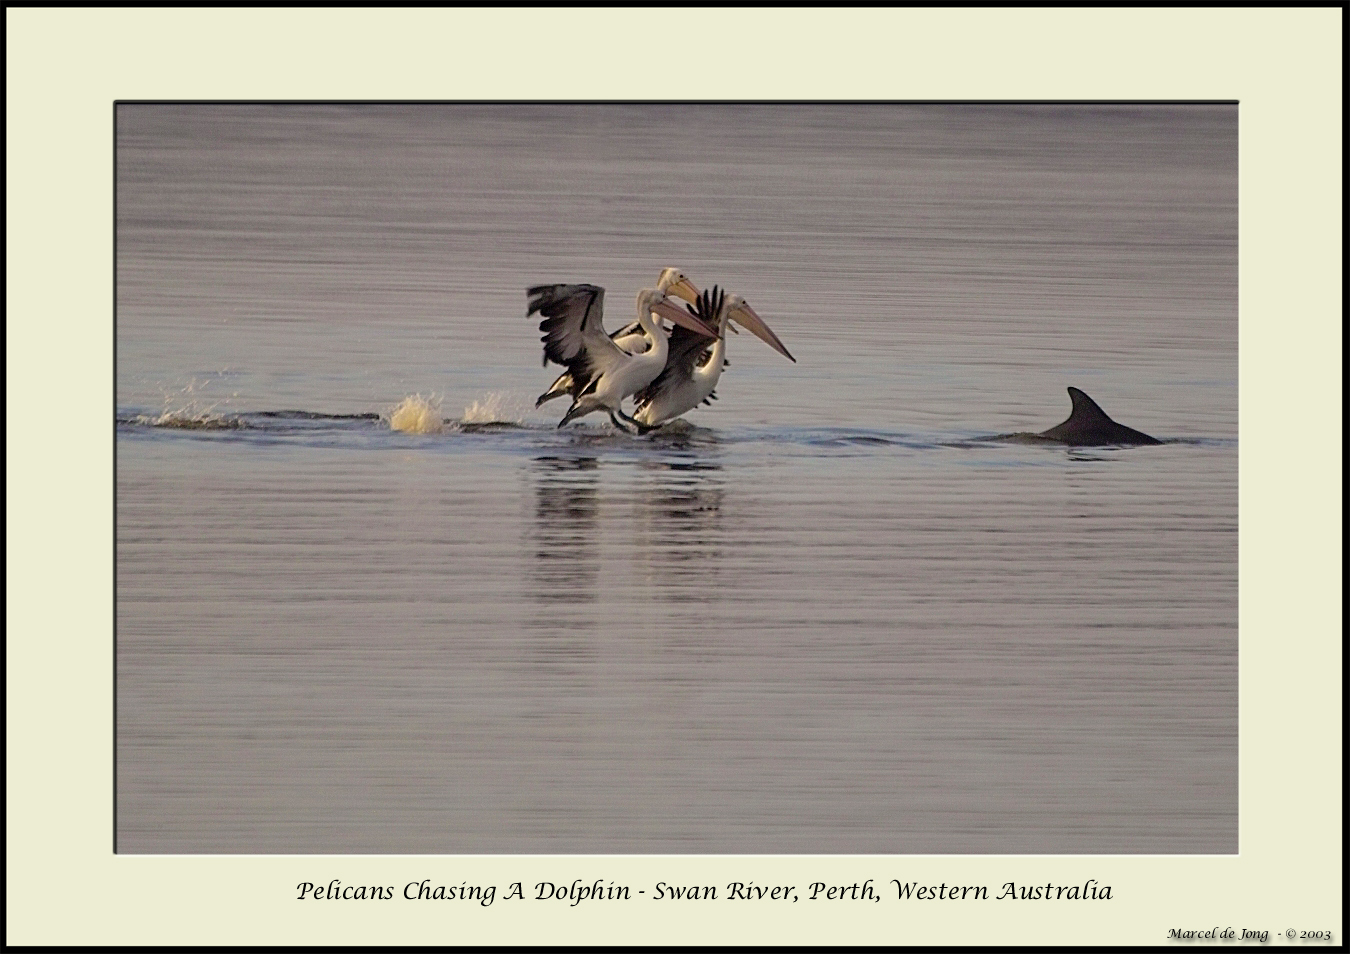 Pelicans Chasing a Dolphin - Swan River